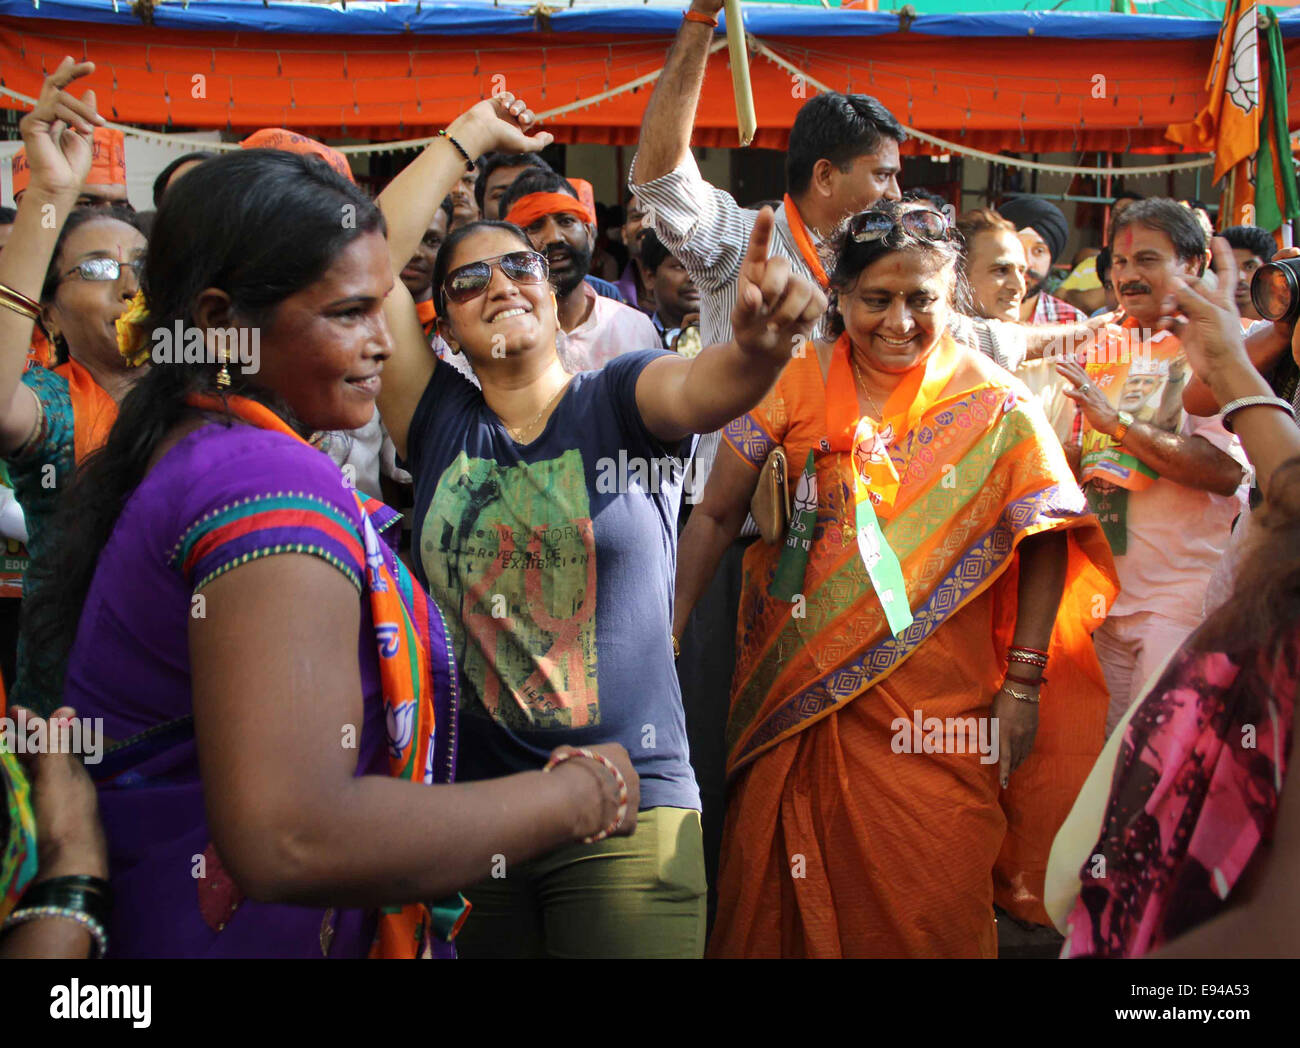 Mumbai, India. 19th Oct, 2014. Supporters of India's ruling Bharatiya Janata Party (BJP) celebrate as early results indicated the party leading in the Maharashtra state assembly elections in Mumbai, India, Oct. 19, 2014. India's ruling Bharatiya Janata Party (BJP) has won control of the country's financial capital Mumbai through a legislative election in the state of Maharashtra, while also grasping the northern state of Haryana from the Congress, said vote counting results Sunday. Credit:  Stringer/Xinhua/Alamy Live News Stock Photo